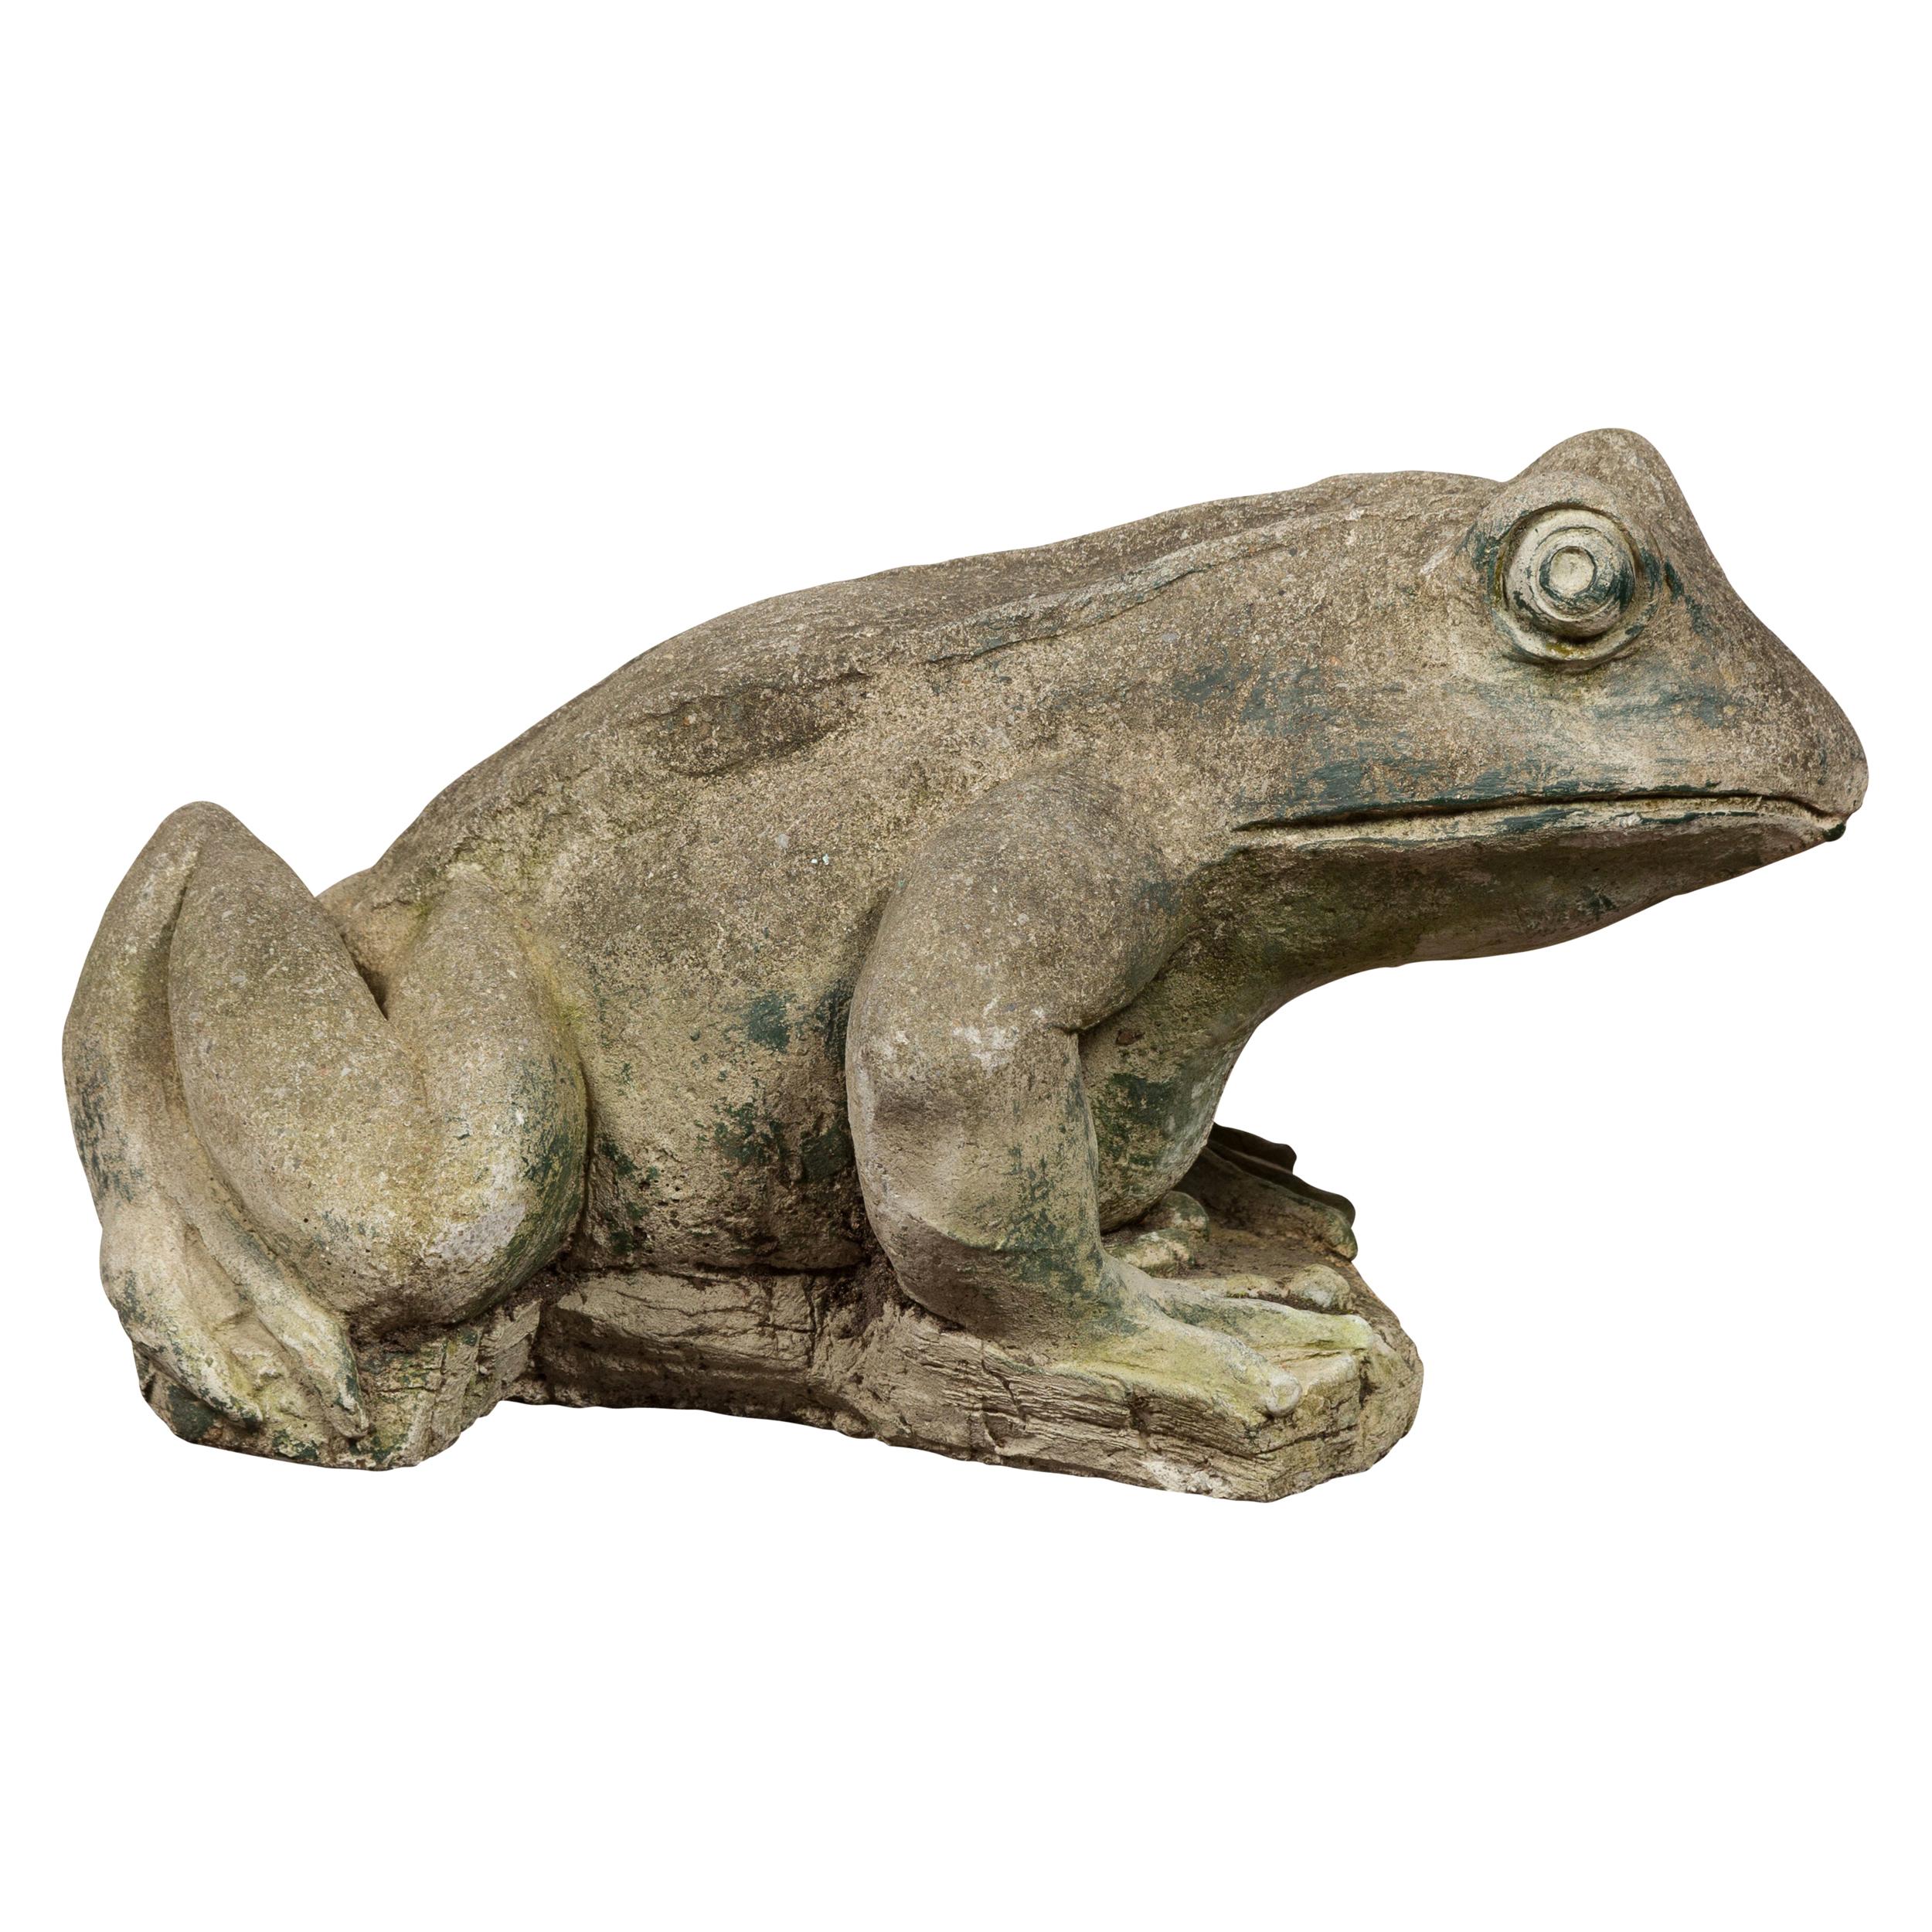 American Giant Stone Frog with Patina, Originally Used as a Fountain